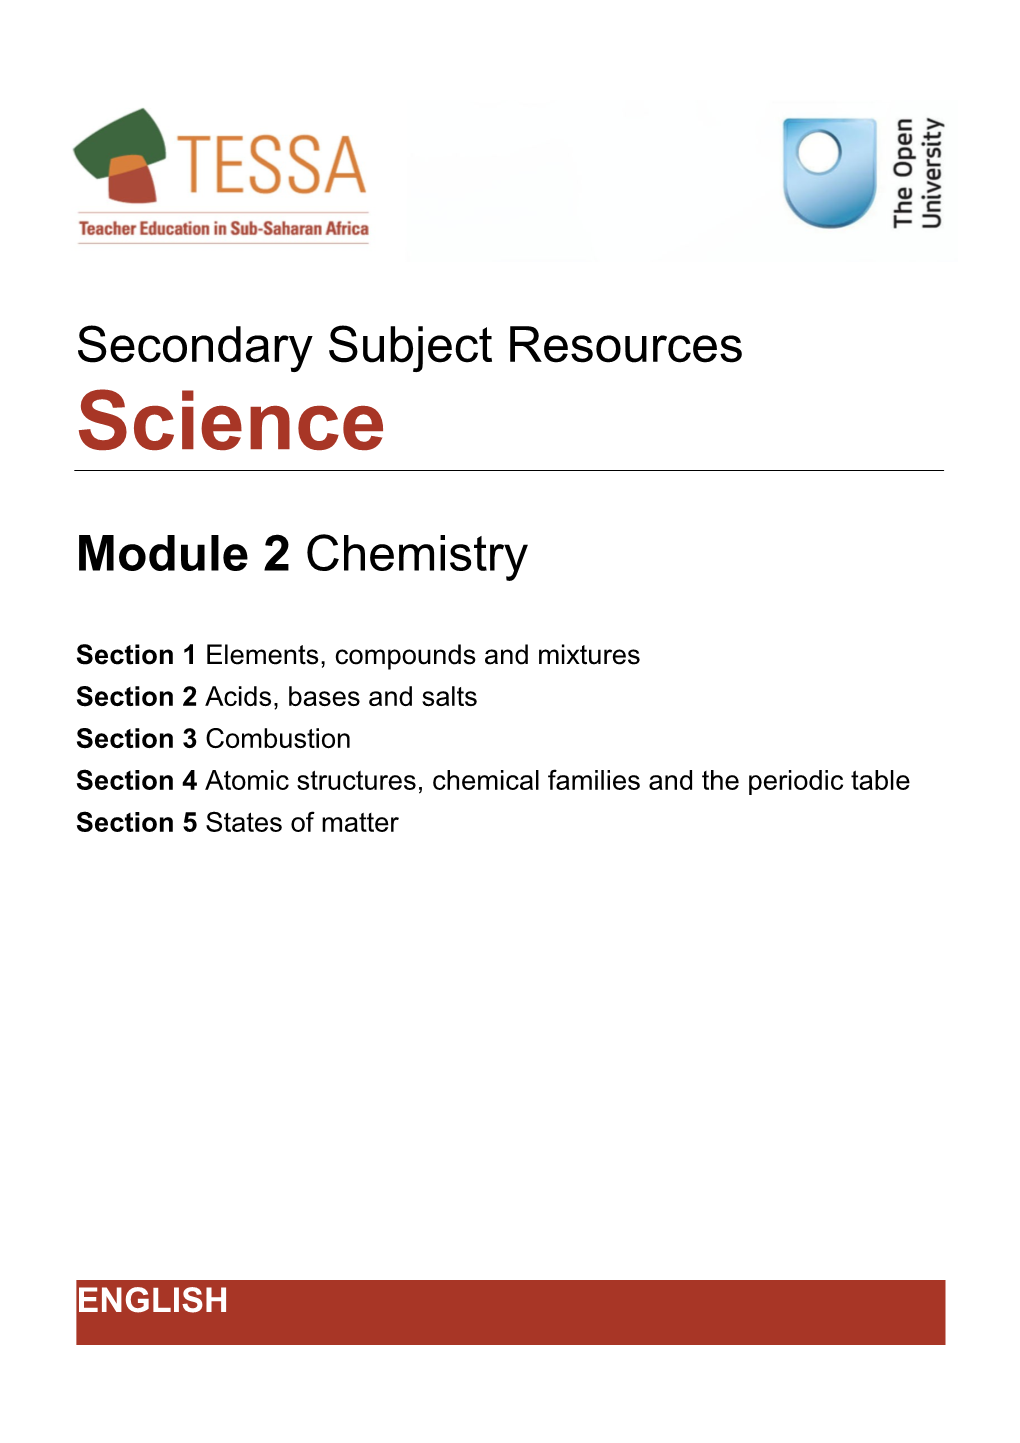 Module 2: Secondary Science - Chemistry s1